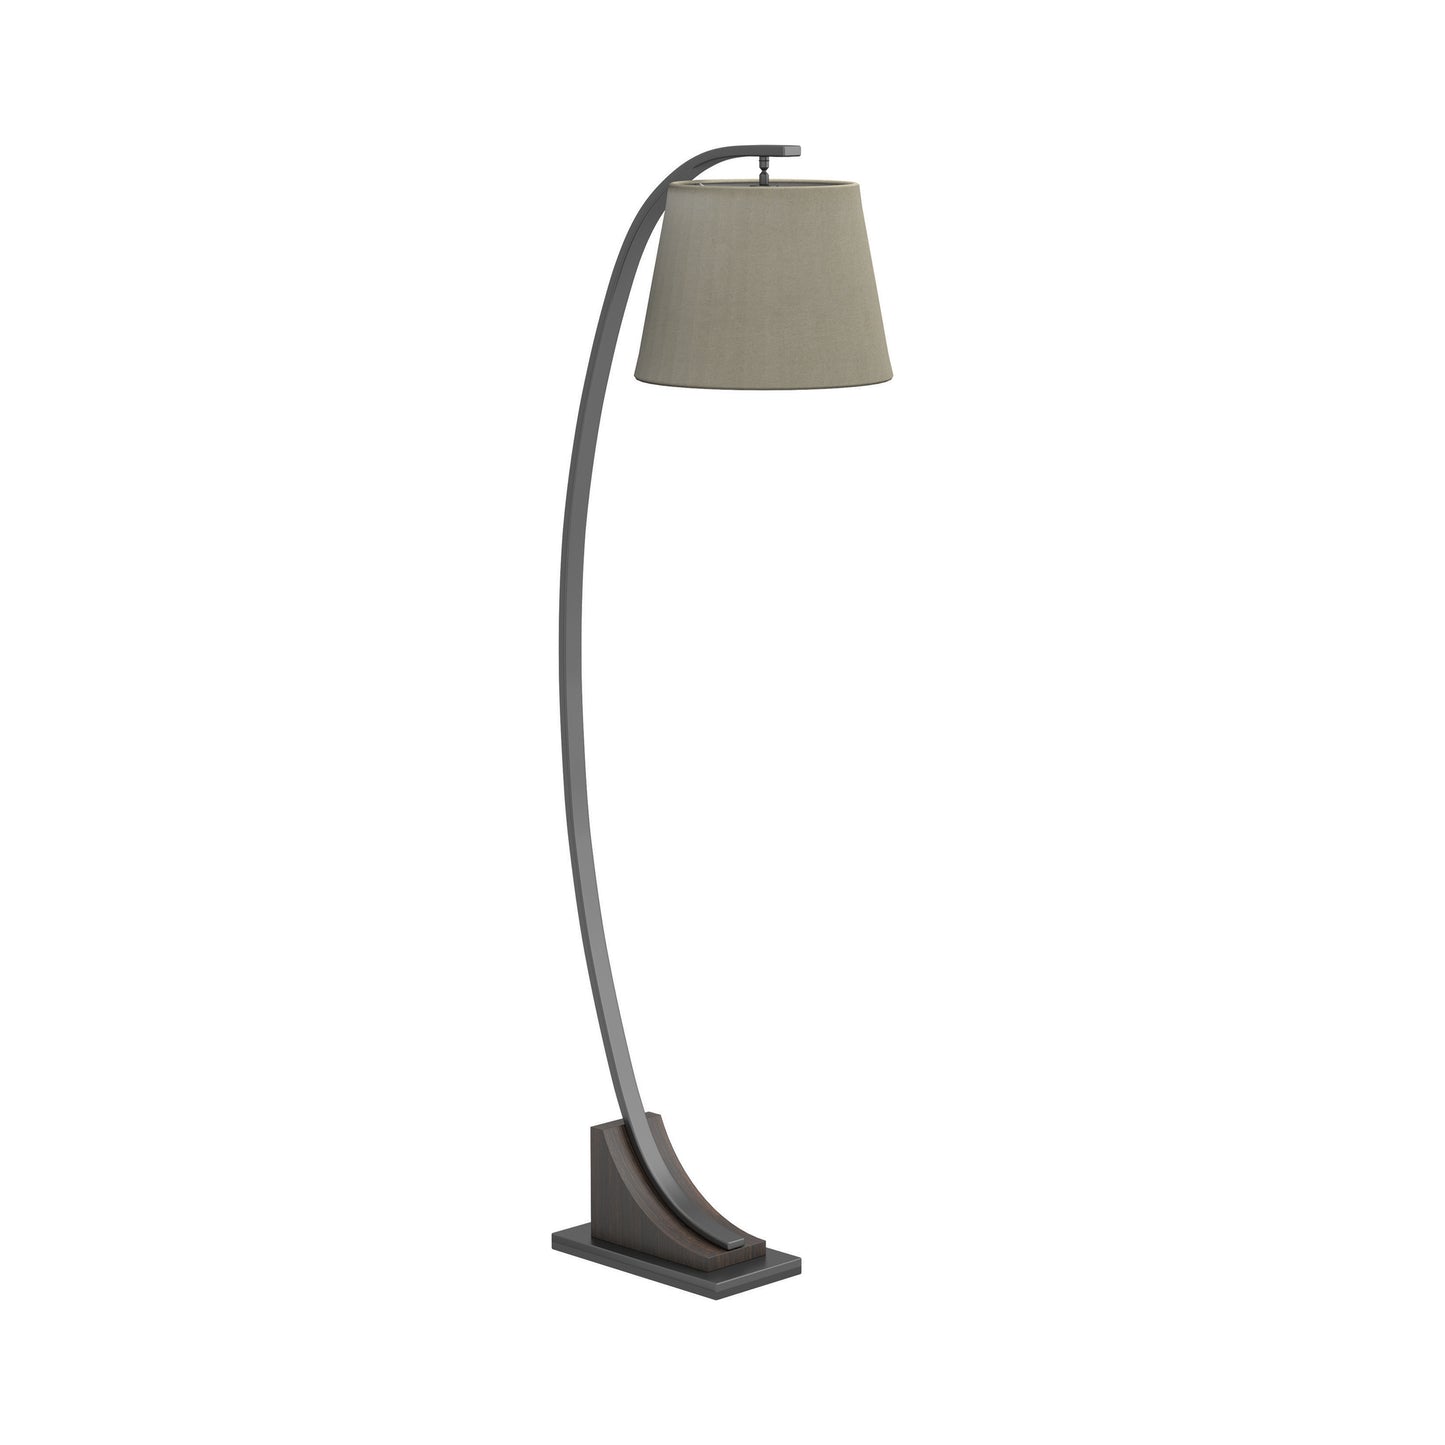 Empire Shade Floor Lamp Oatmeal Brown and Orb